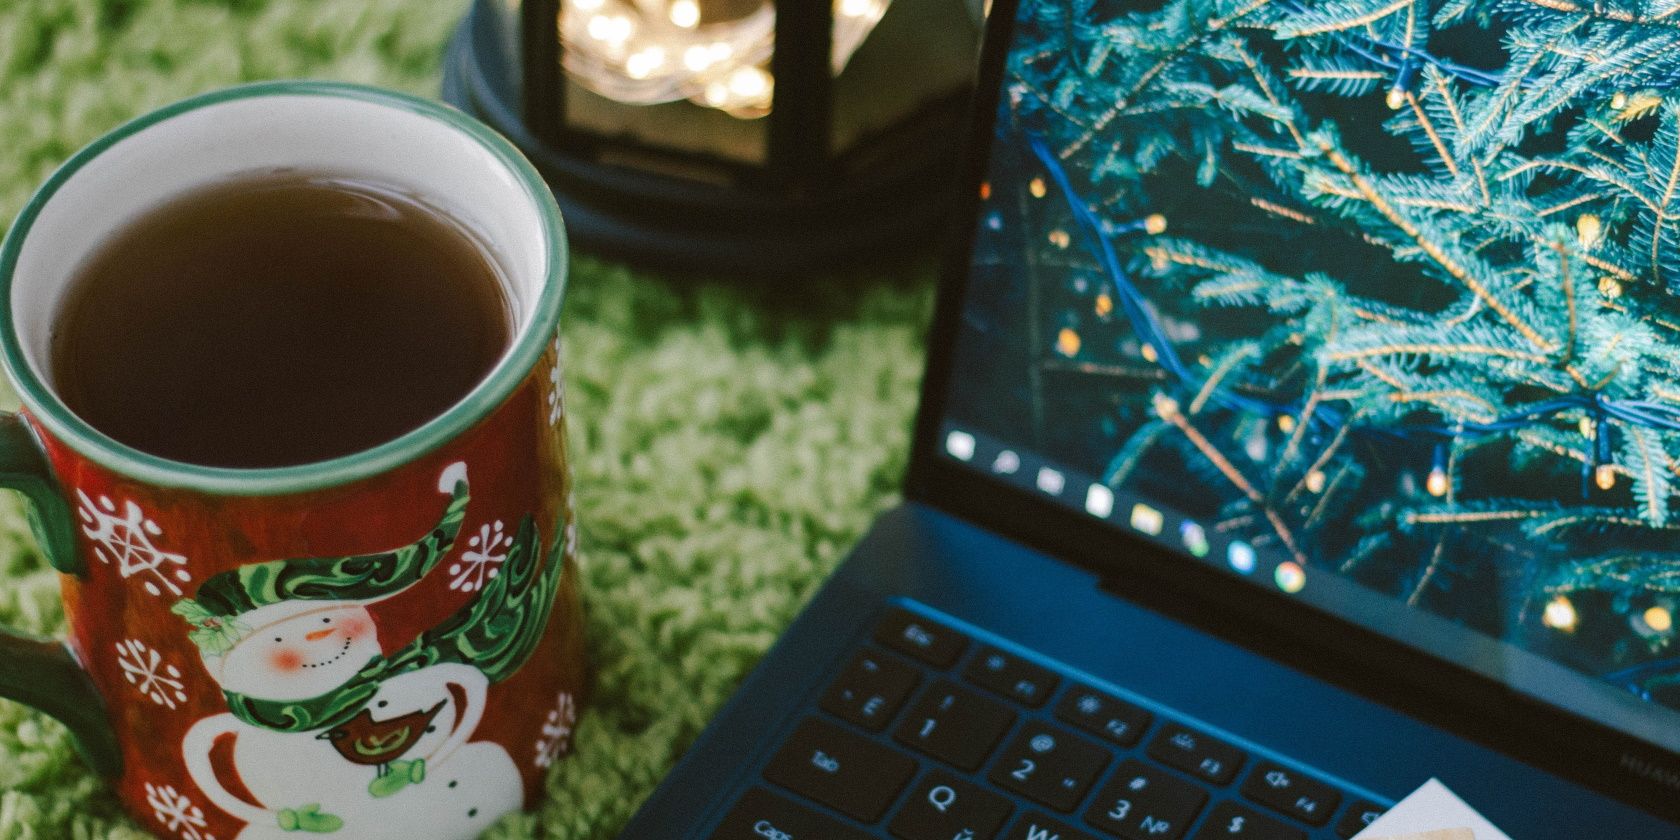 a laptop sitting on grass with a christmas mug next to it